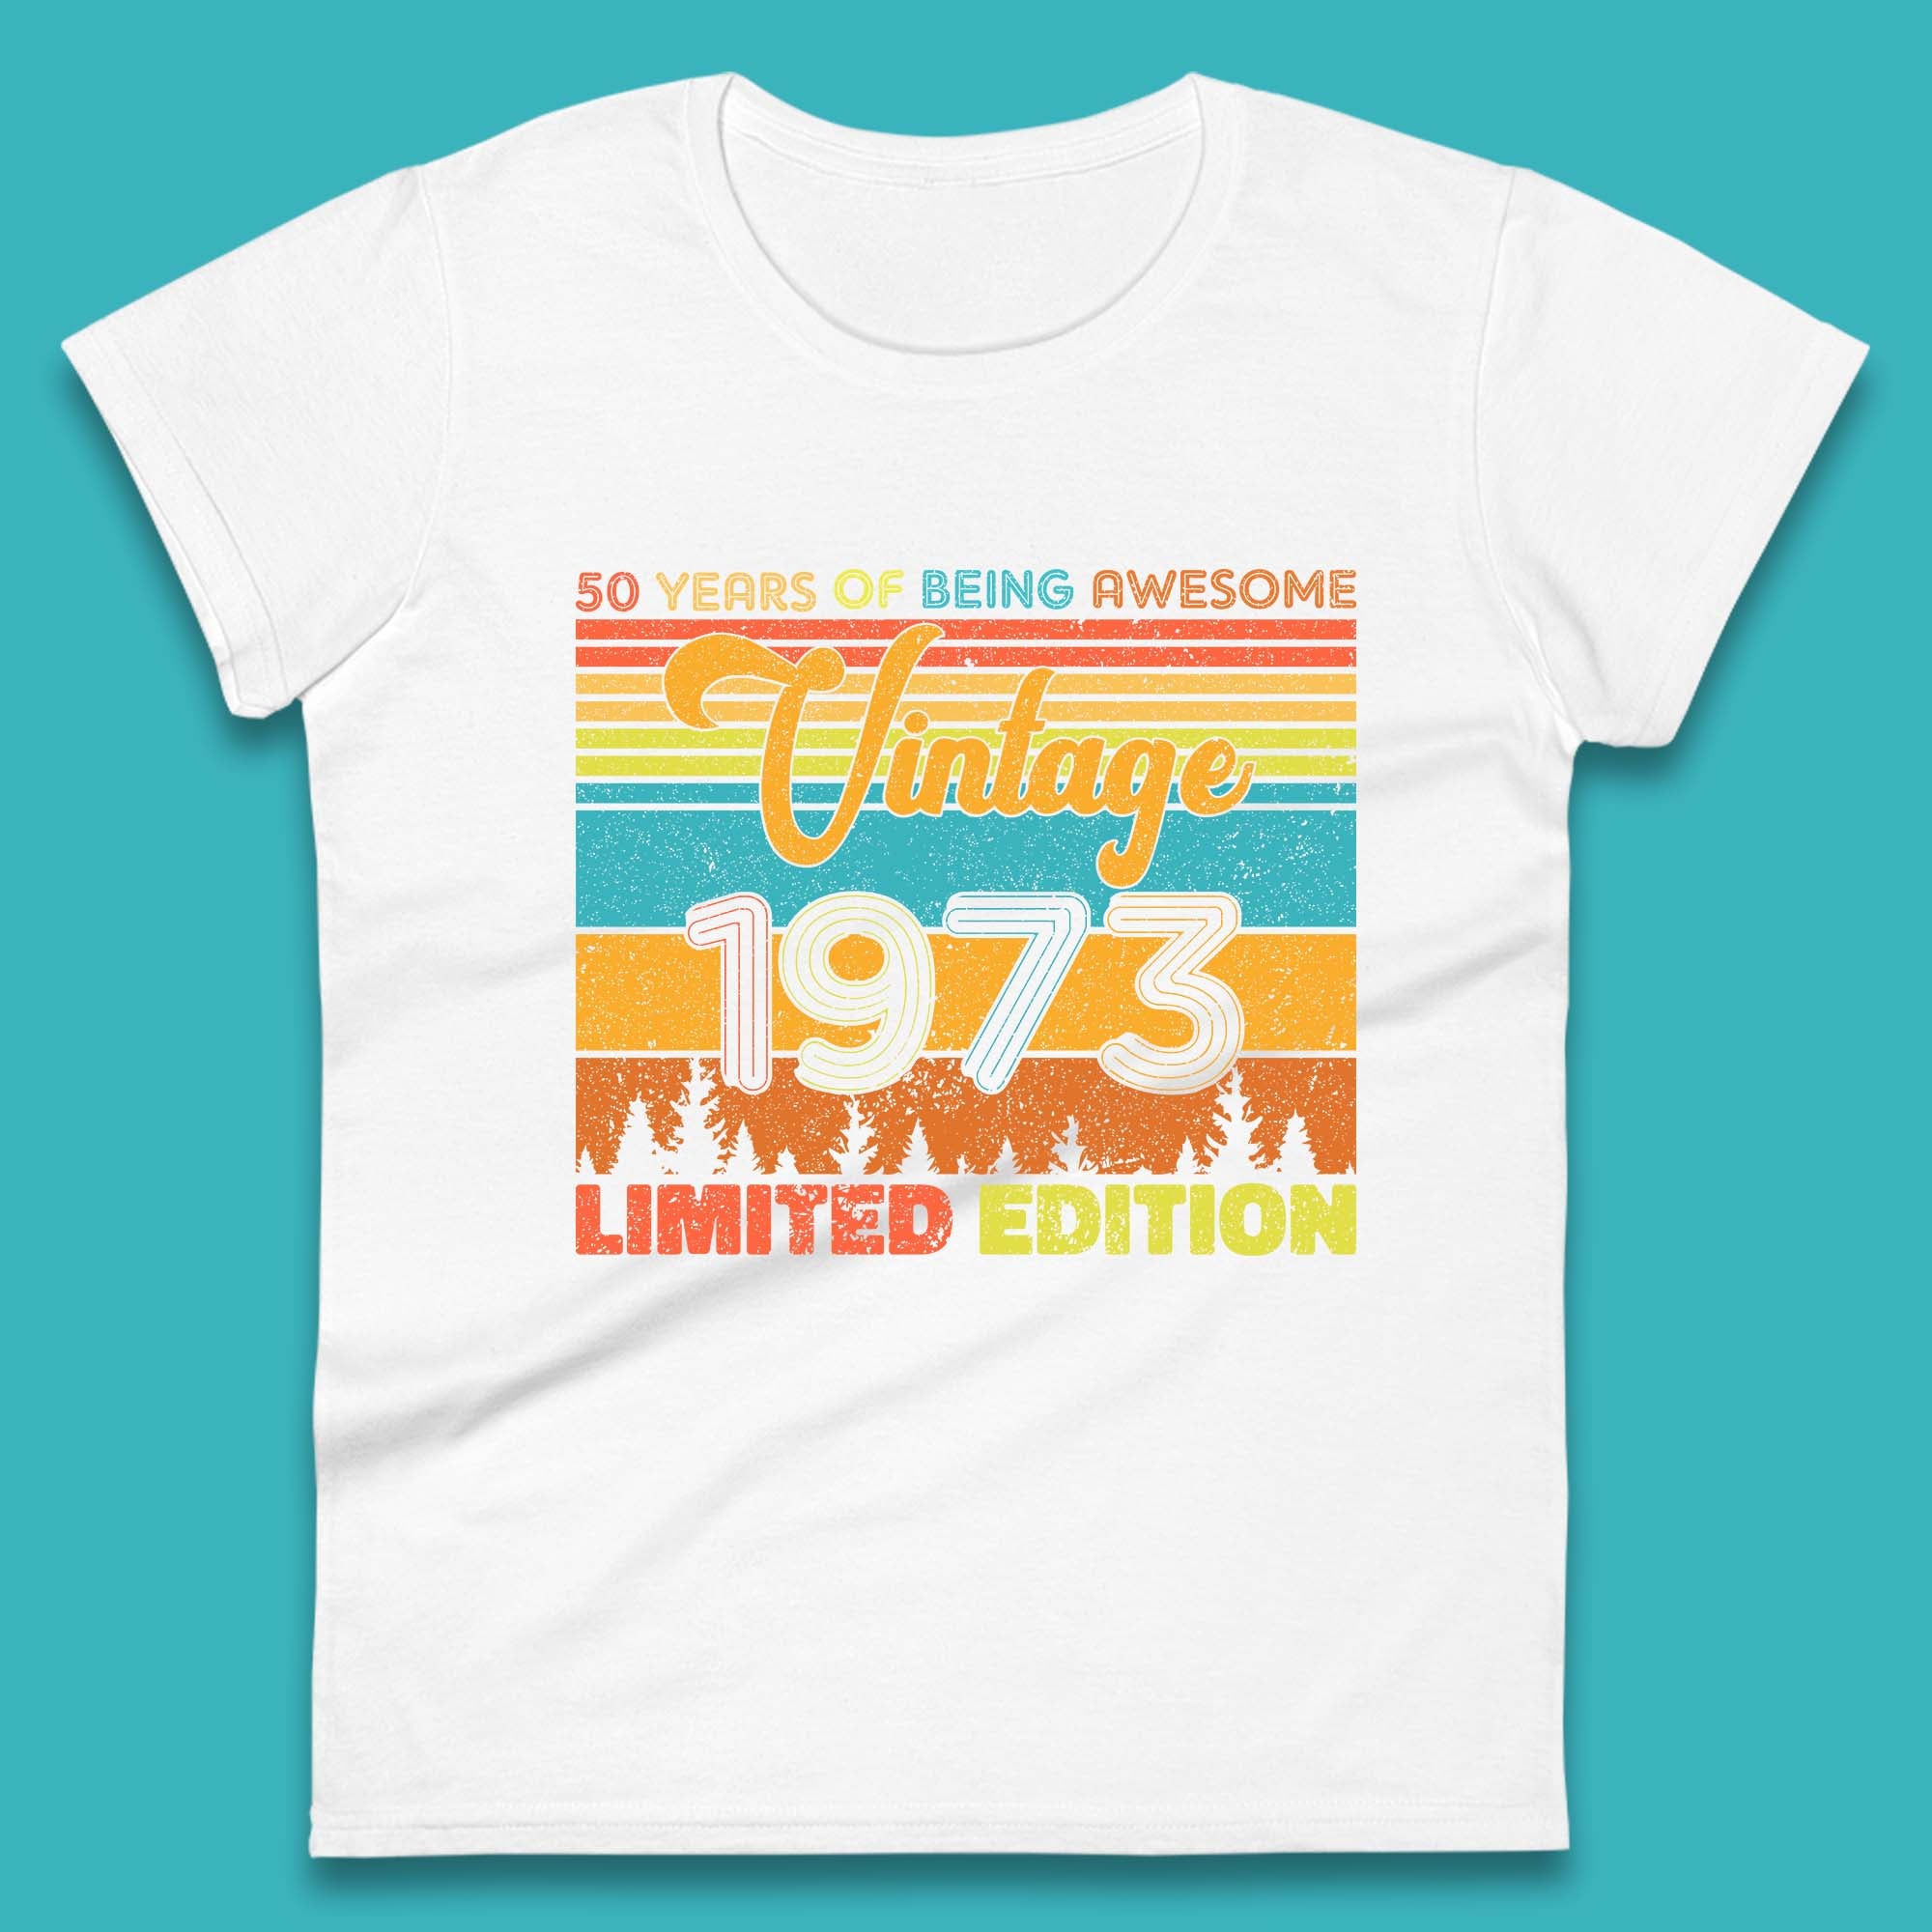 50 Years Of Being Awesome Vintage 1973 Limited Edition Vintage Retro 50th Birthday Womens Tee Top